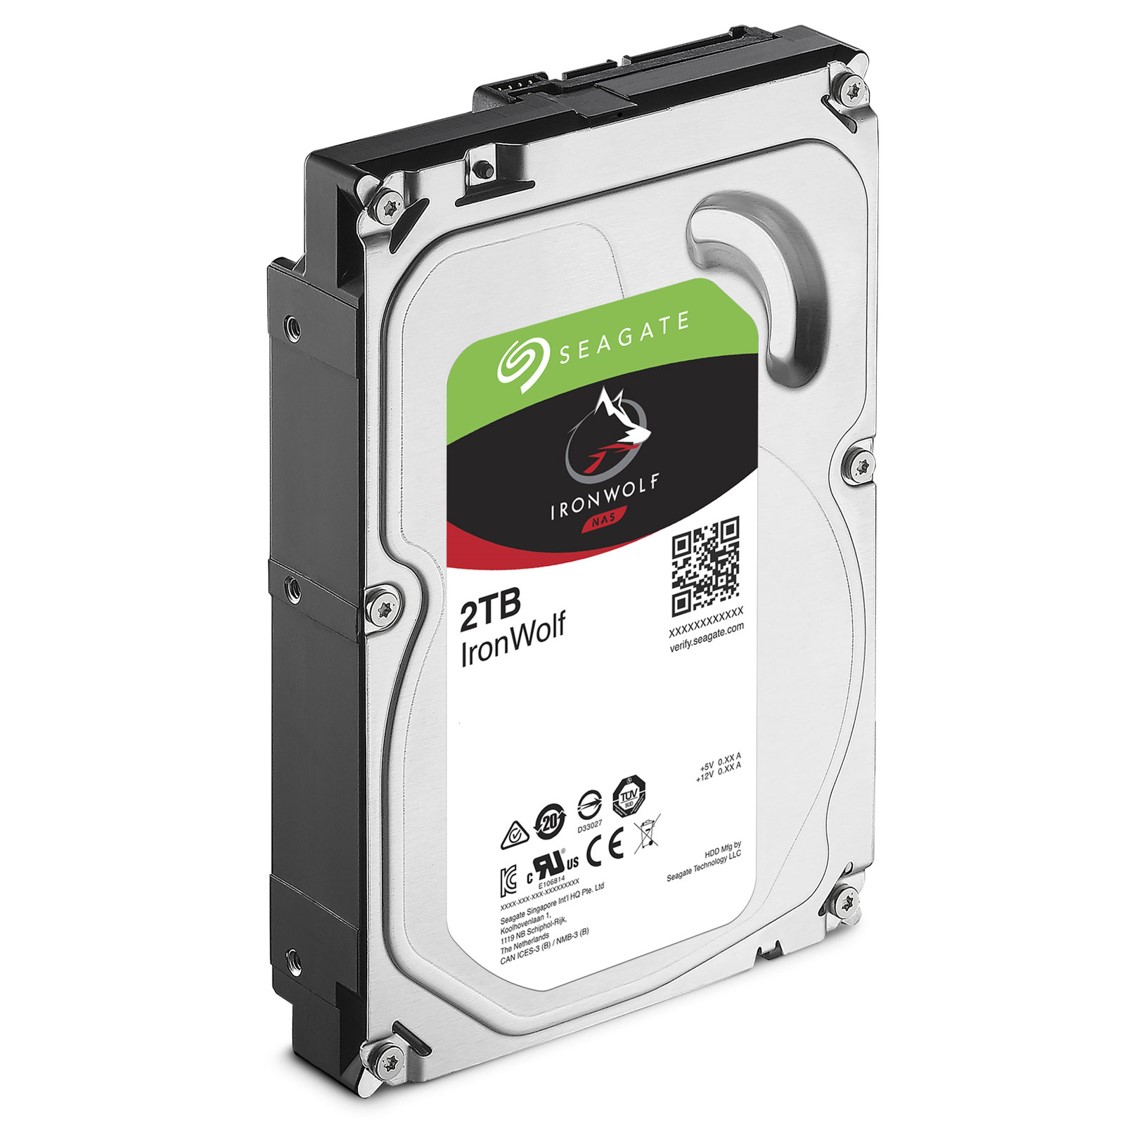 Ổ cứng HDD 3.5